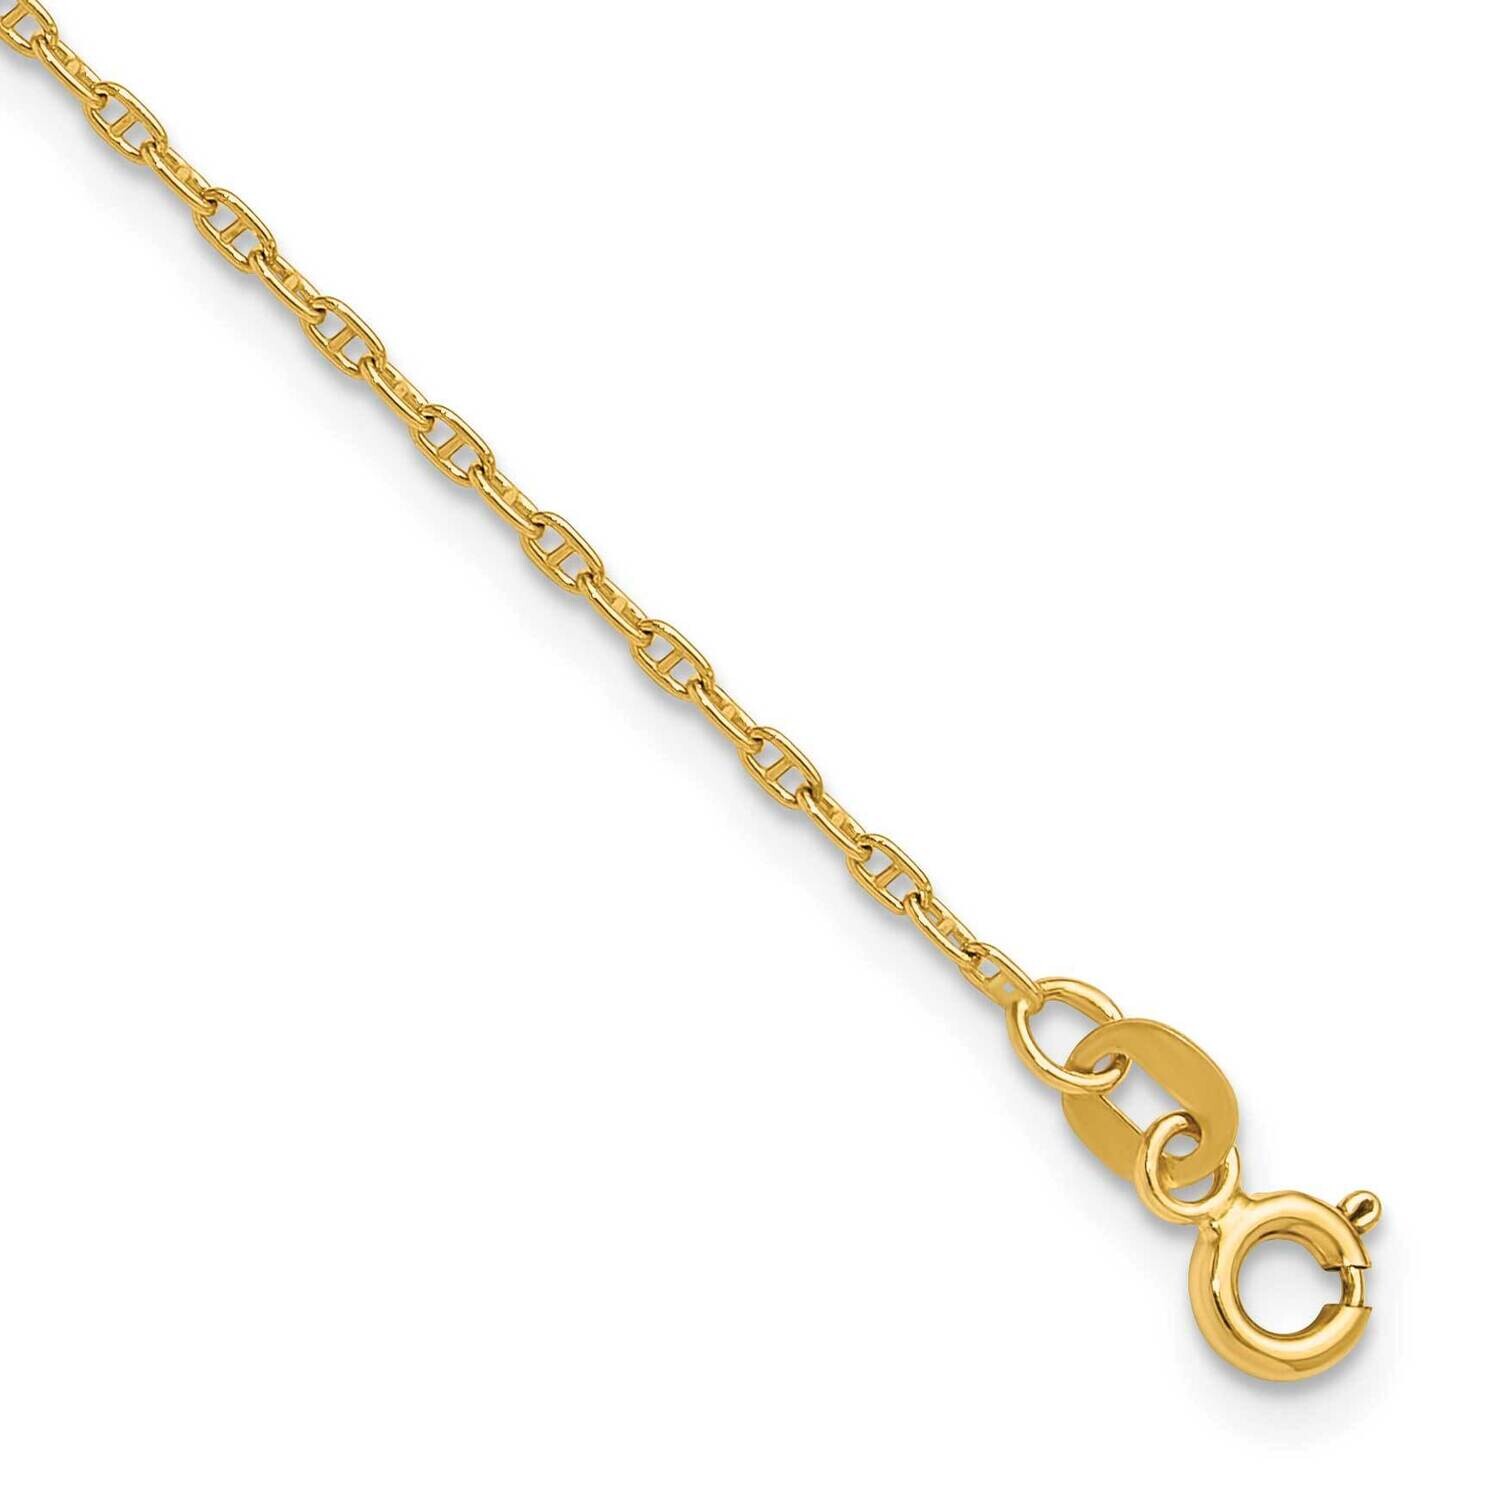 1.5mm Mariners Link Chain 7 Inch 14k Gold MA040-7